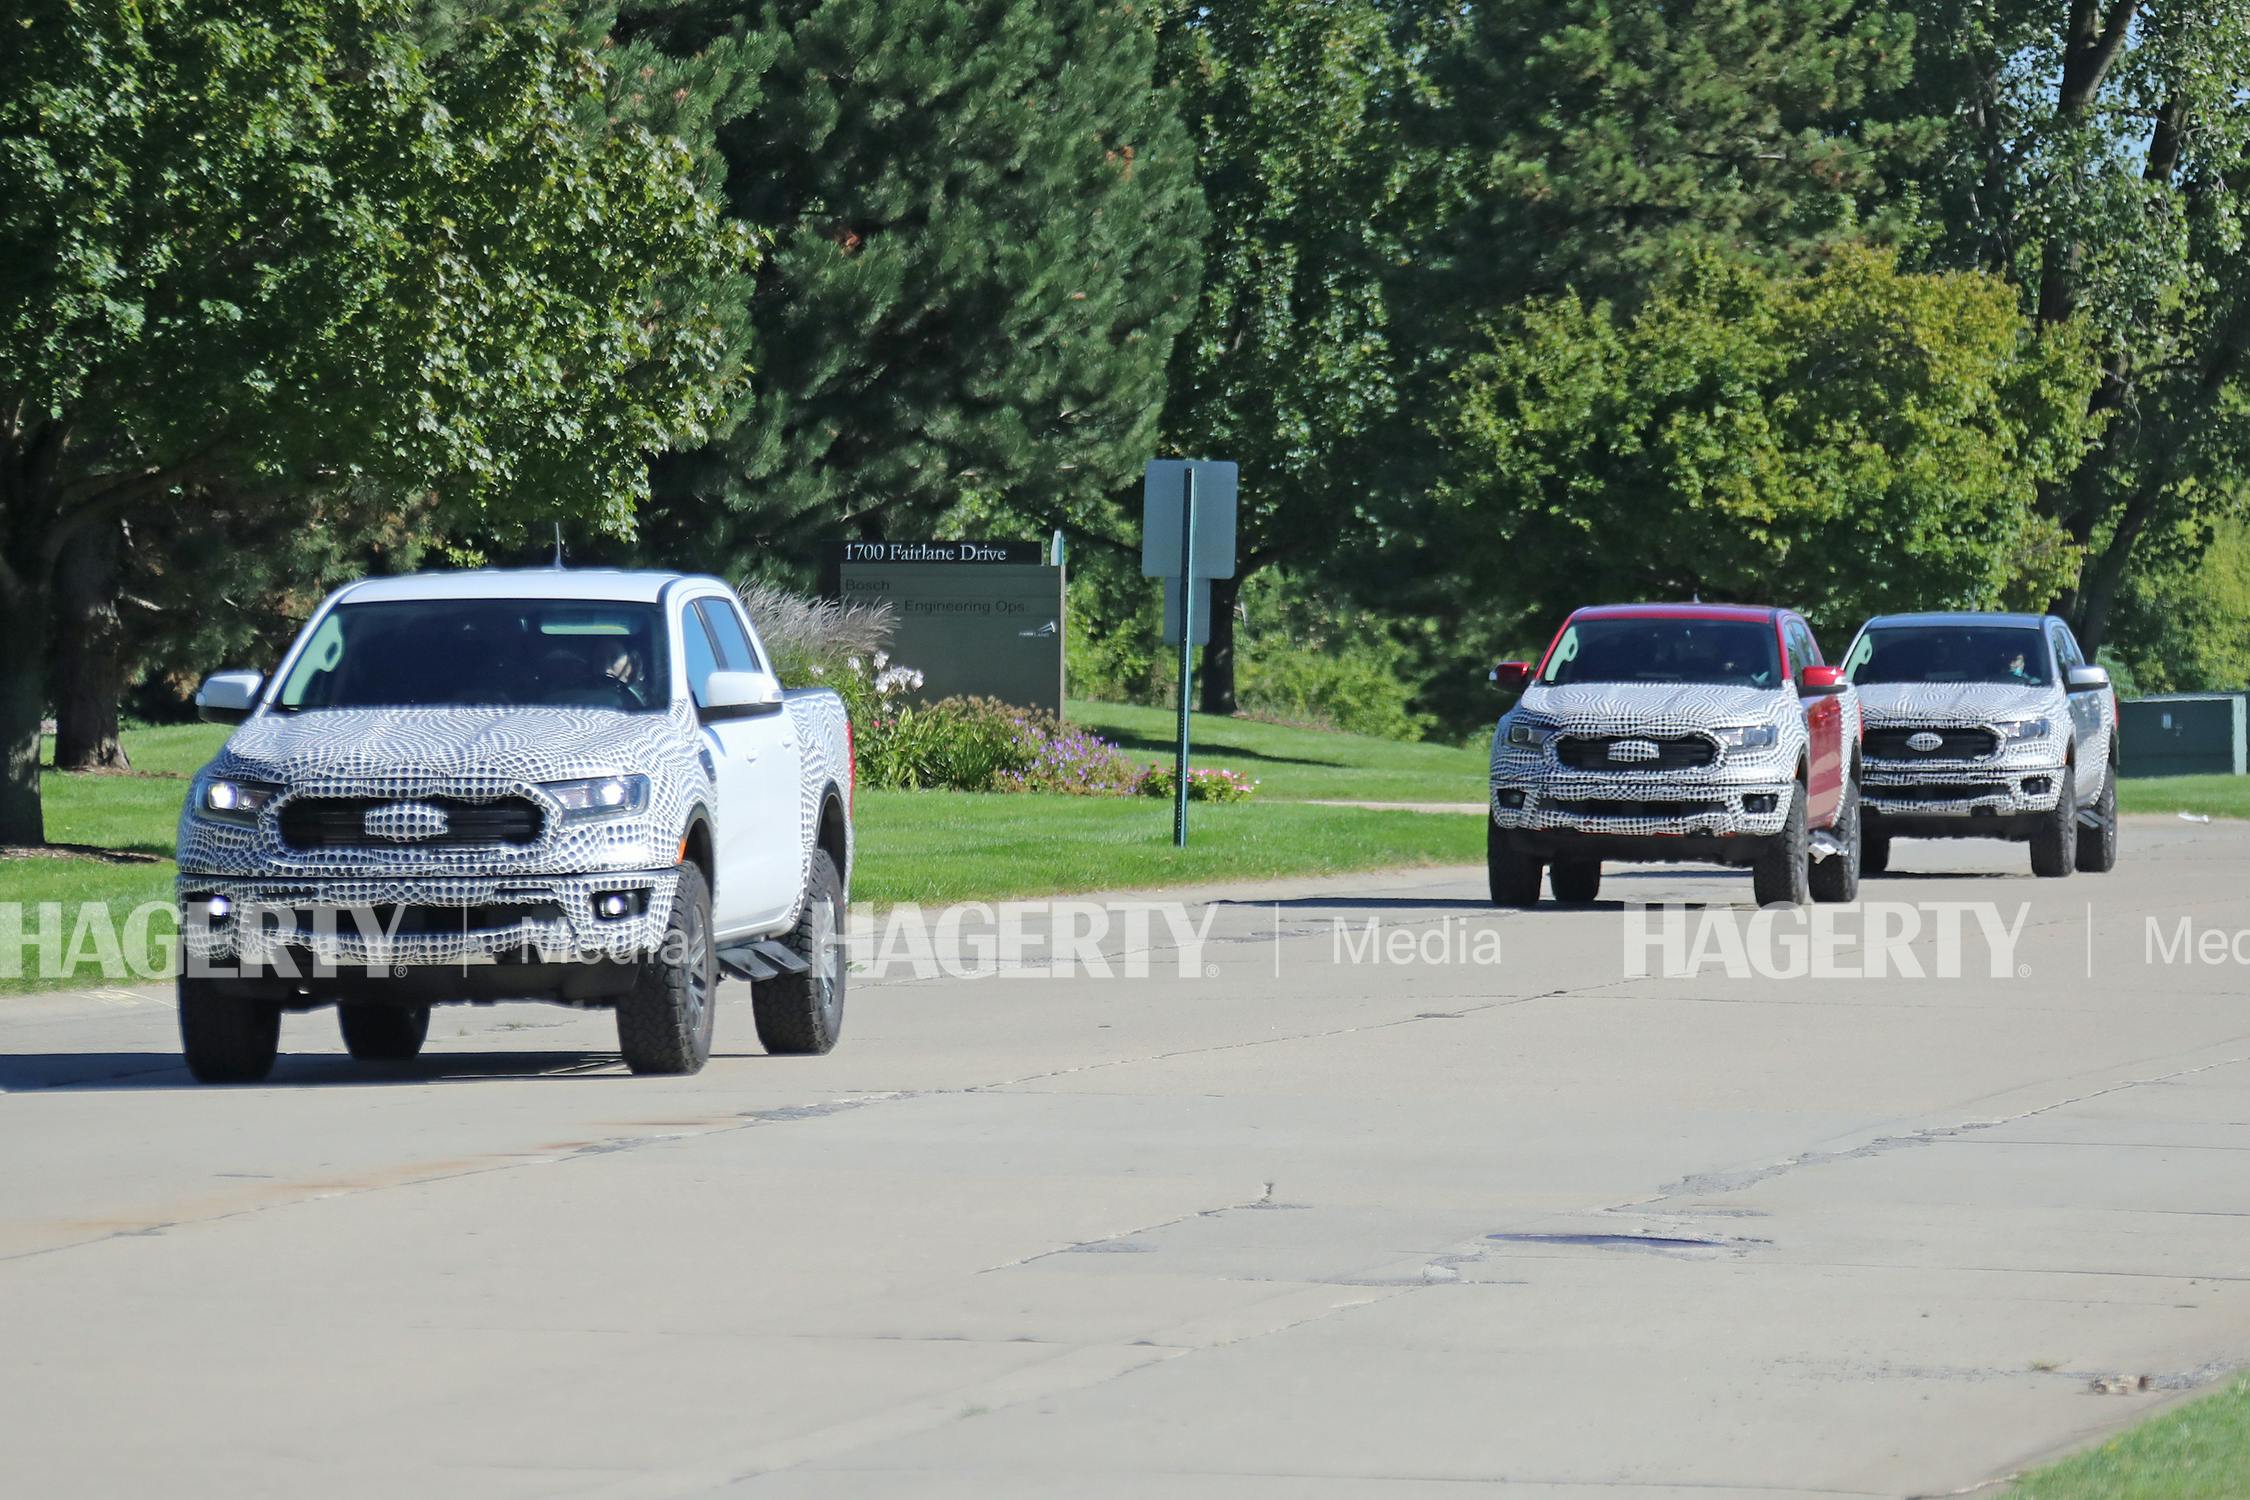 ford ranger tremor spy photo three truck fronts